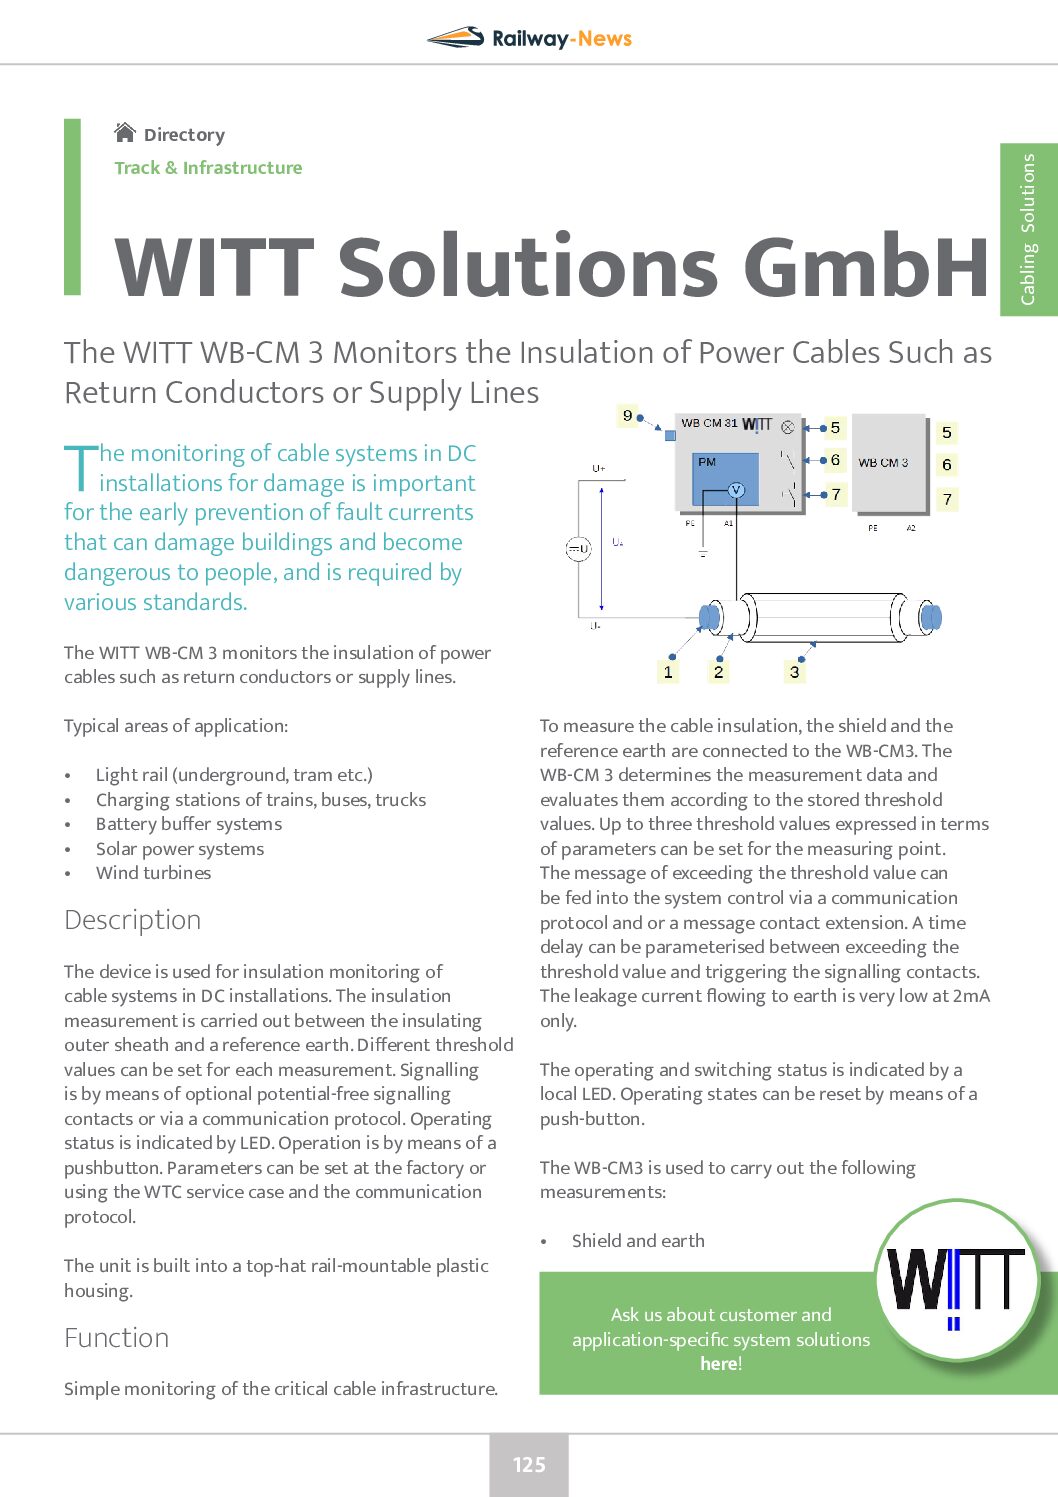 The WITT WB-CM 3 Monitors the Insulation of Power Cables